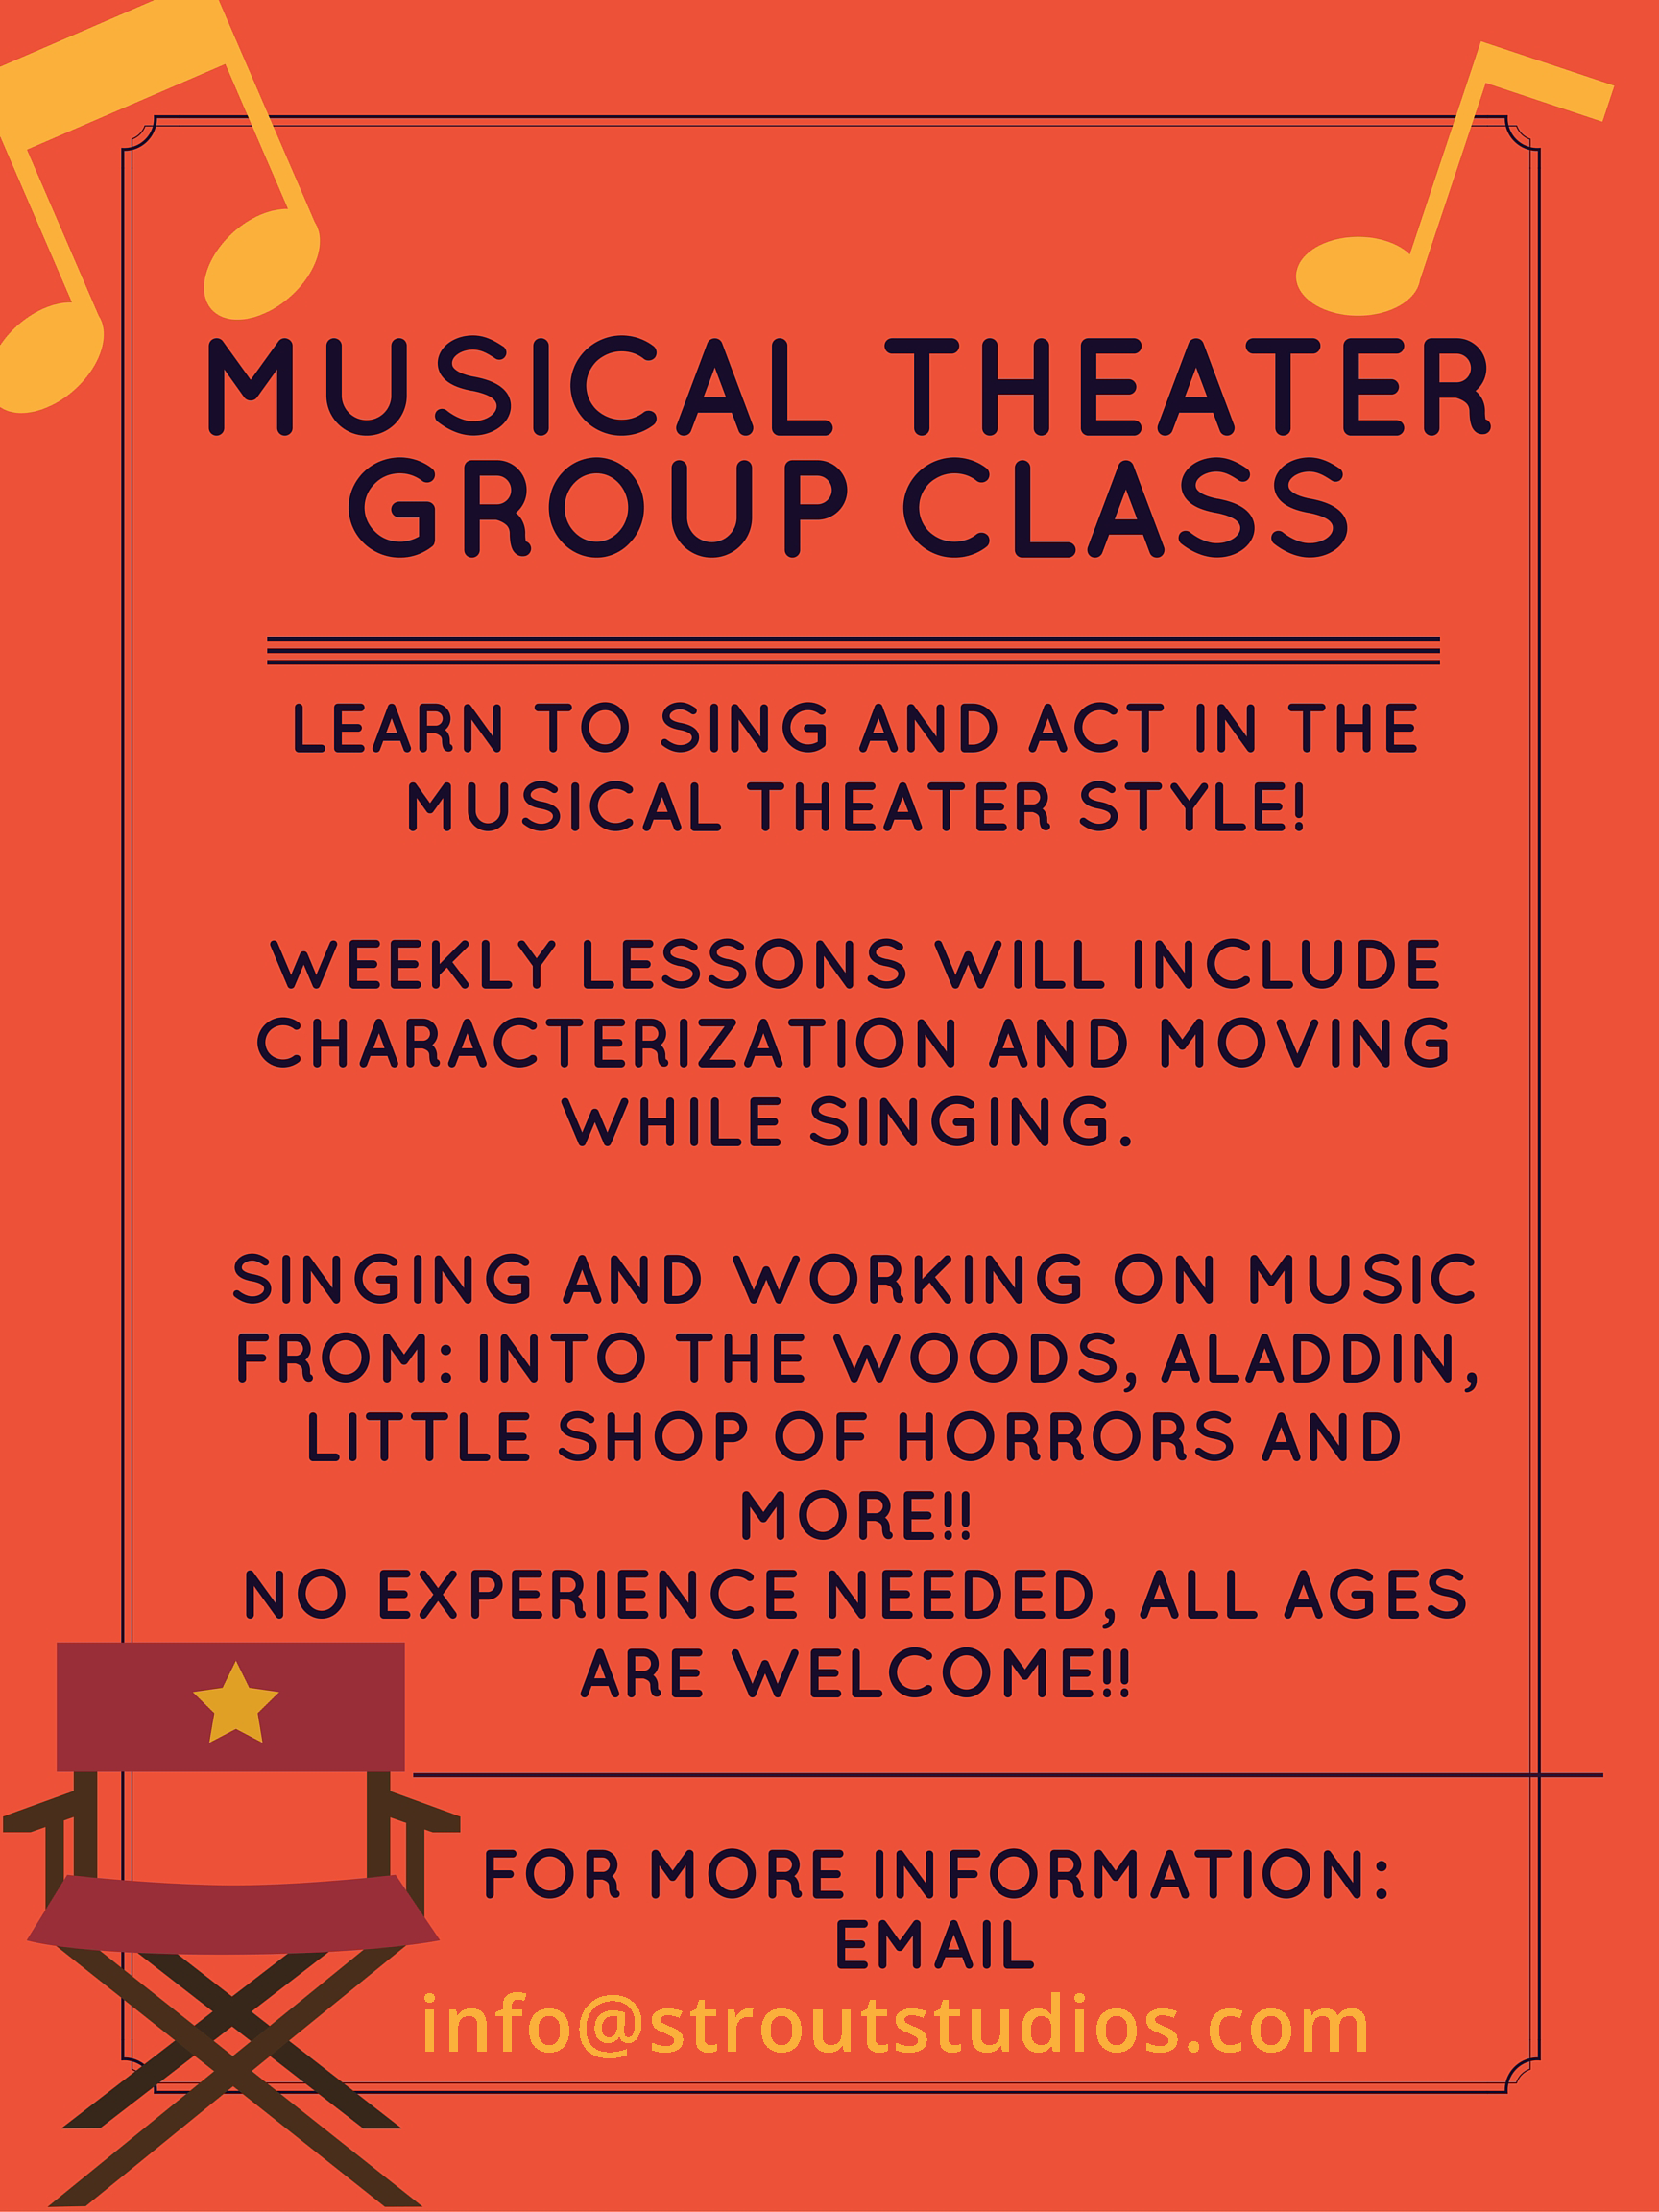 MUSICAL THEATER GROUP CLASS